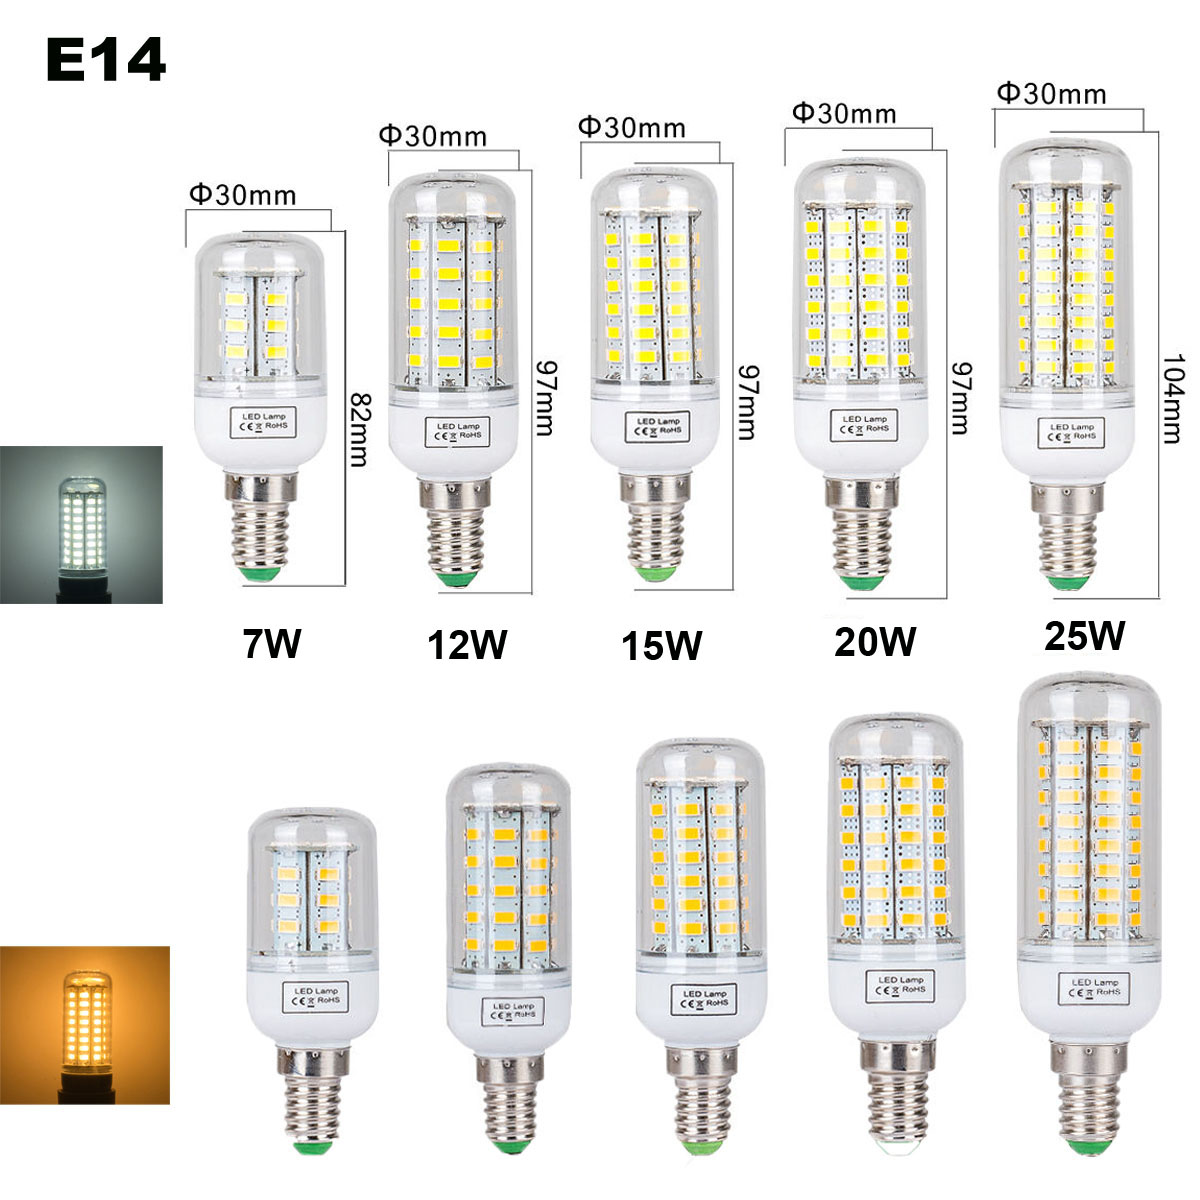 E27 E14 B22 G9 LED Maïs Ampoule 5W 8W 15W 20W 25W SMD5730 Blanc Chaud/Froid  220V